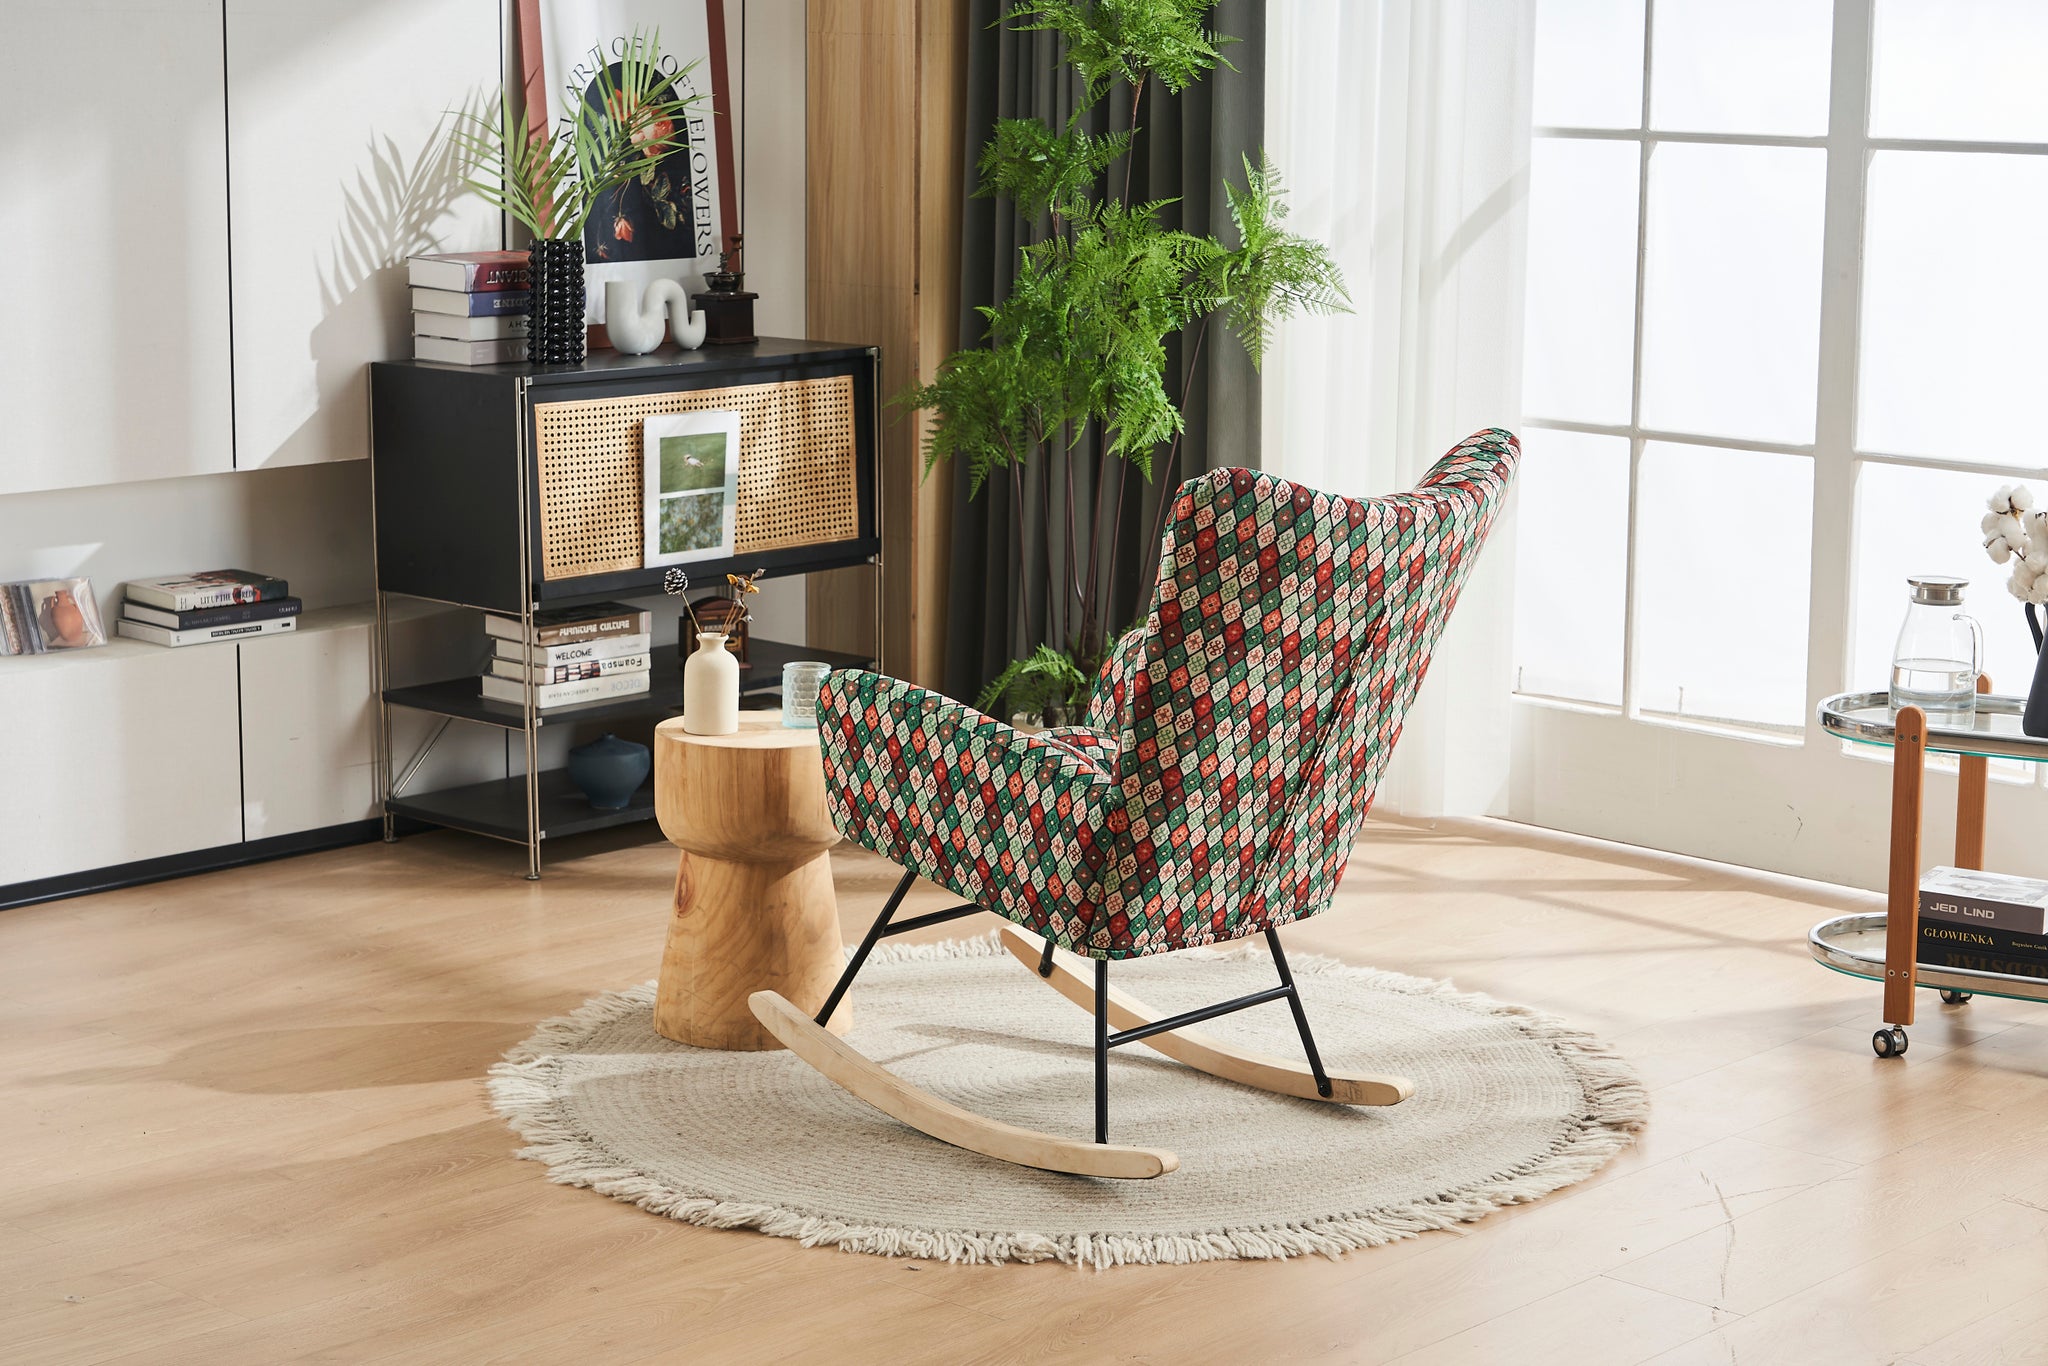 Rocking Chair Nursery, Solid Wood Legs Reading Chair colorful-primary living space-wipe